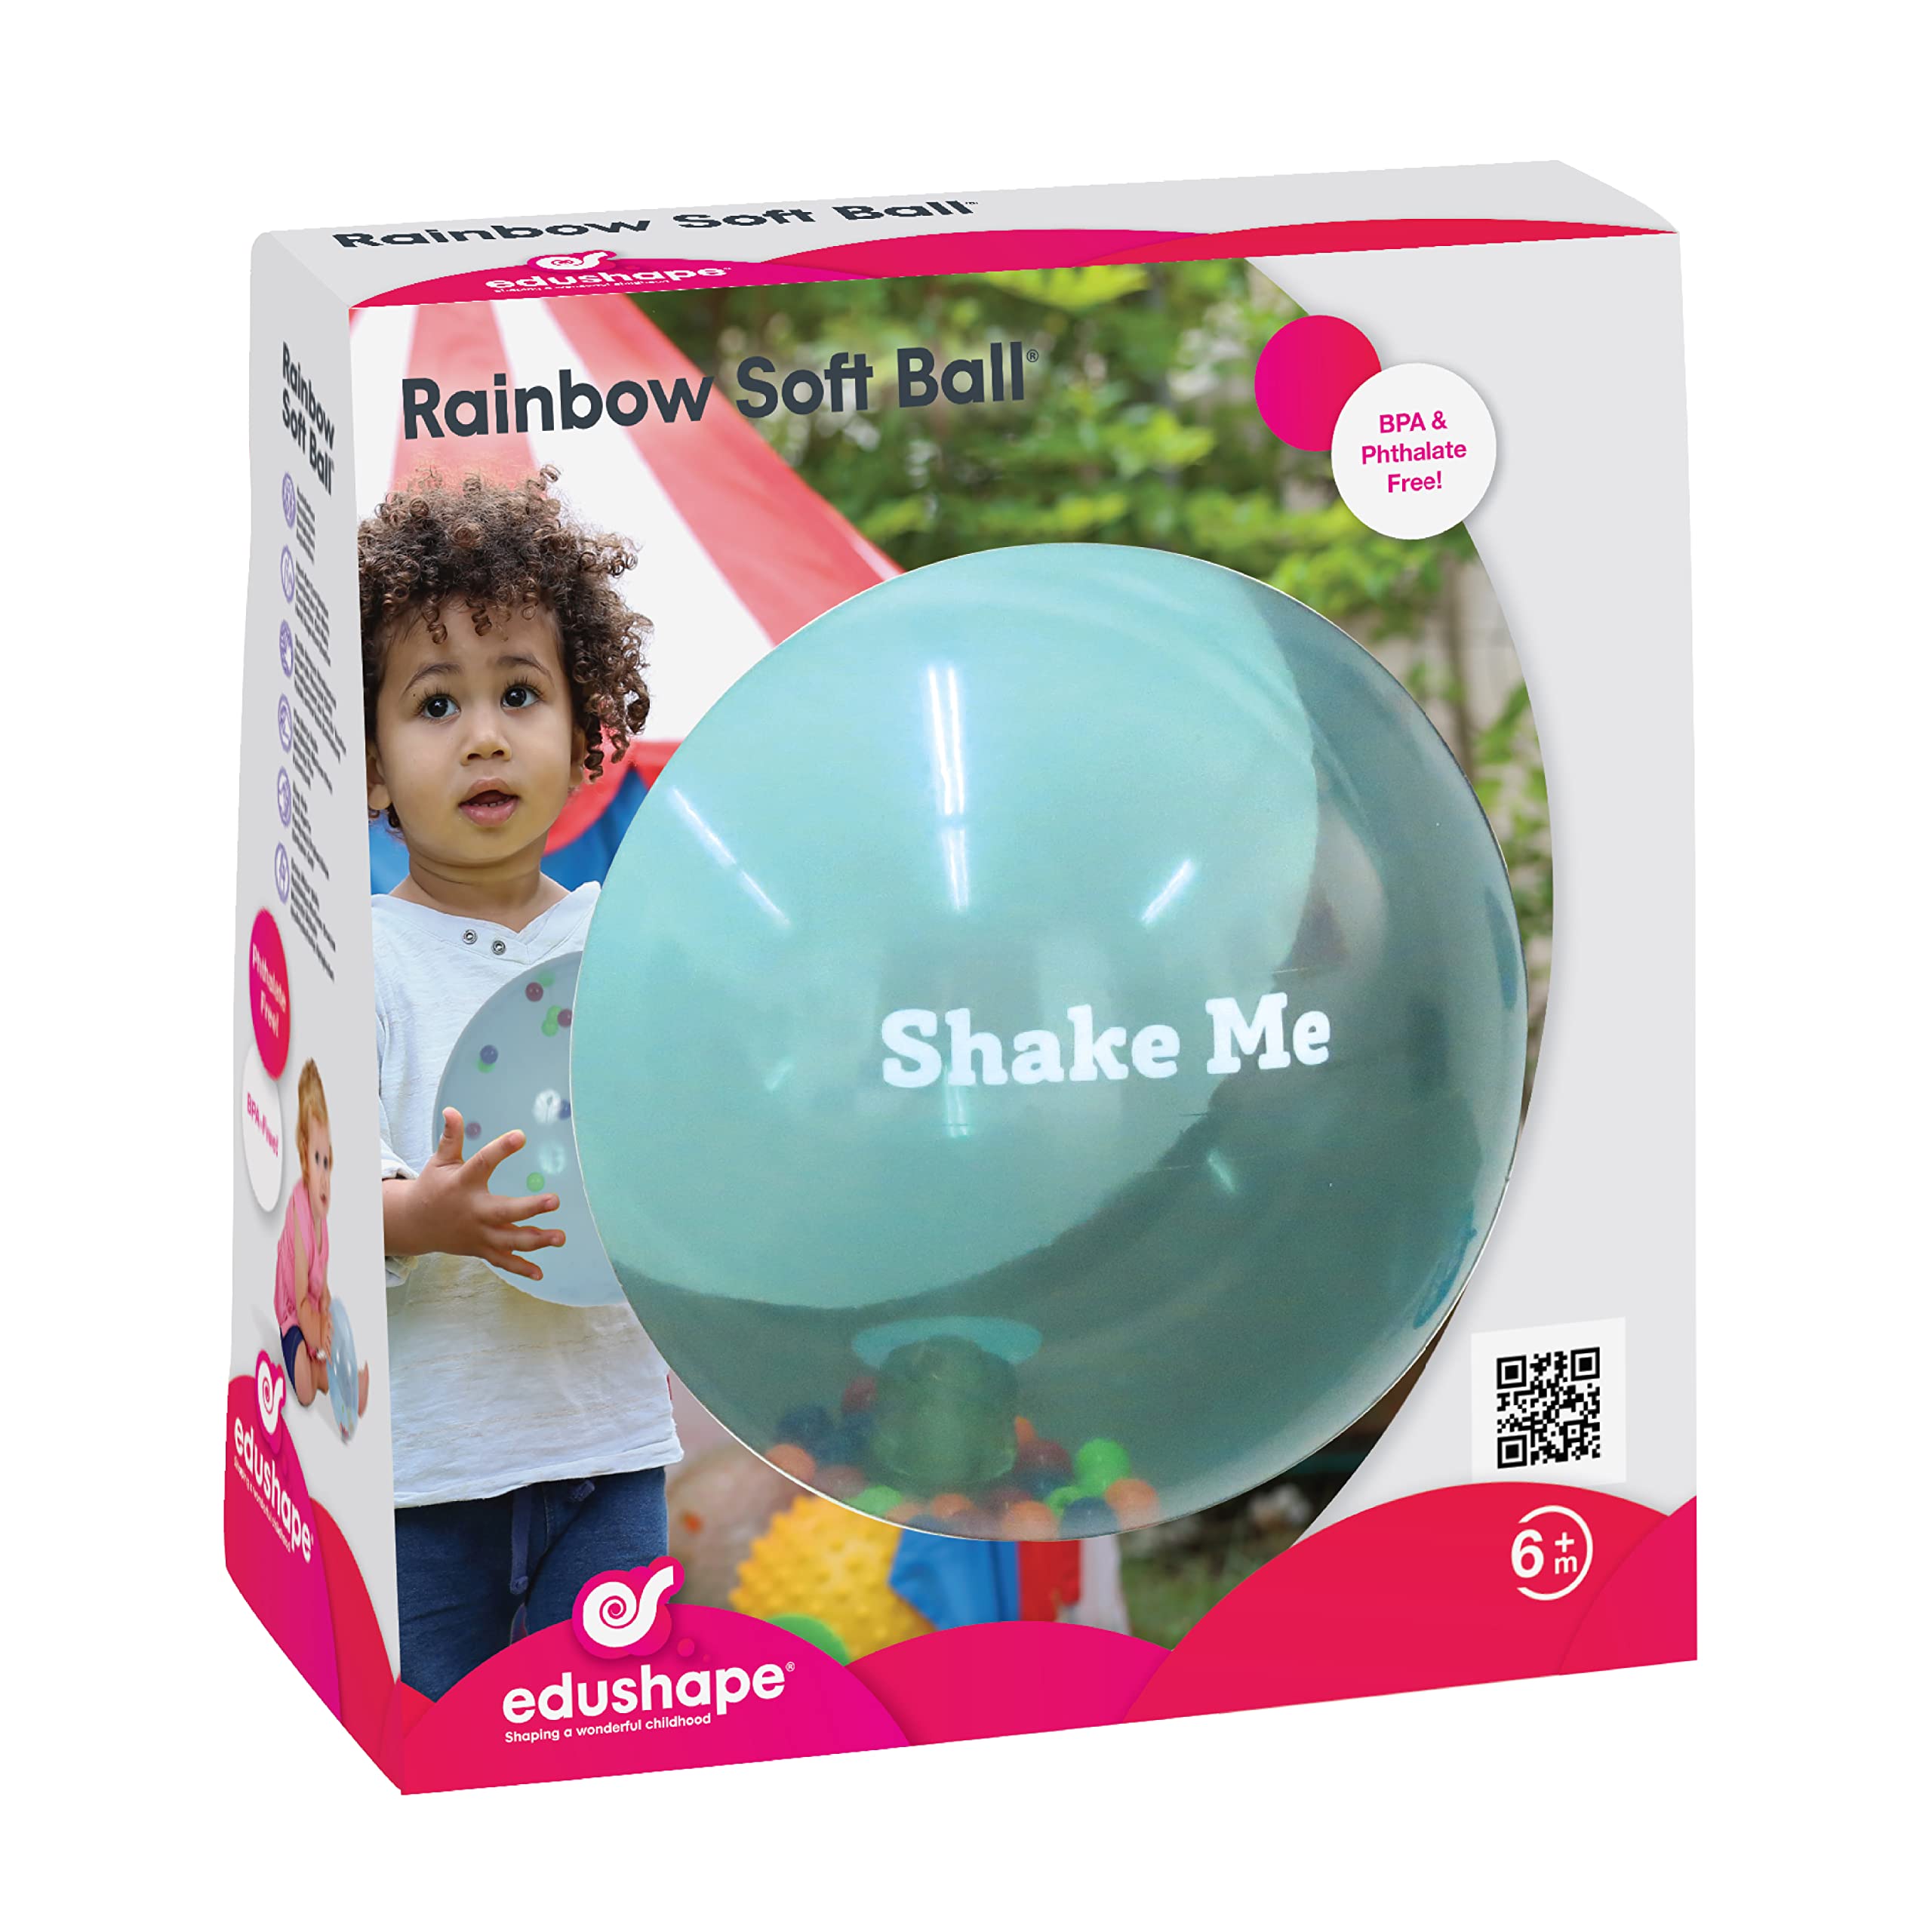 Edushape Sensory Ball for Baby And Toddlers (7 Inch) - Rainbow Soft Ball - Multi-Color Mini Noisemaker Toddler Ball for Baby with Colorful Beads Inside - Fine Motor Skills Developmental Baby Ball Toy for Babies, Toddlers, Infants and Kids